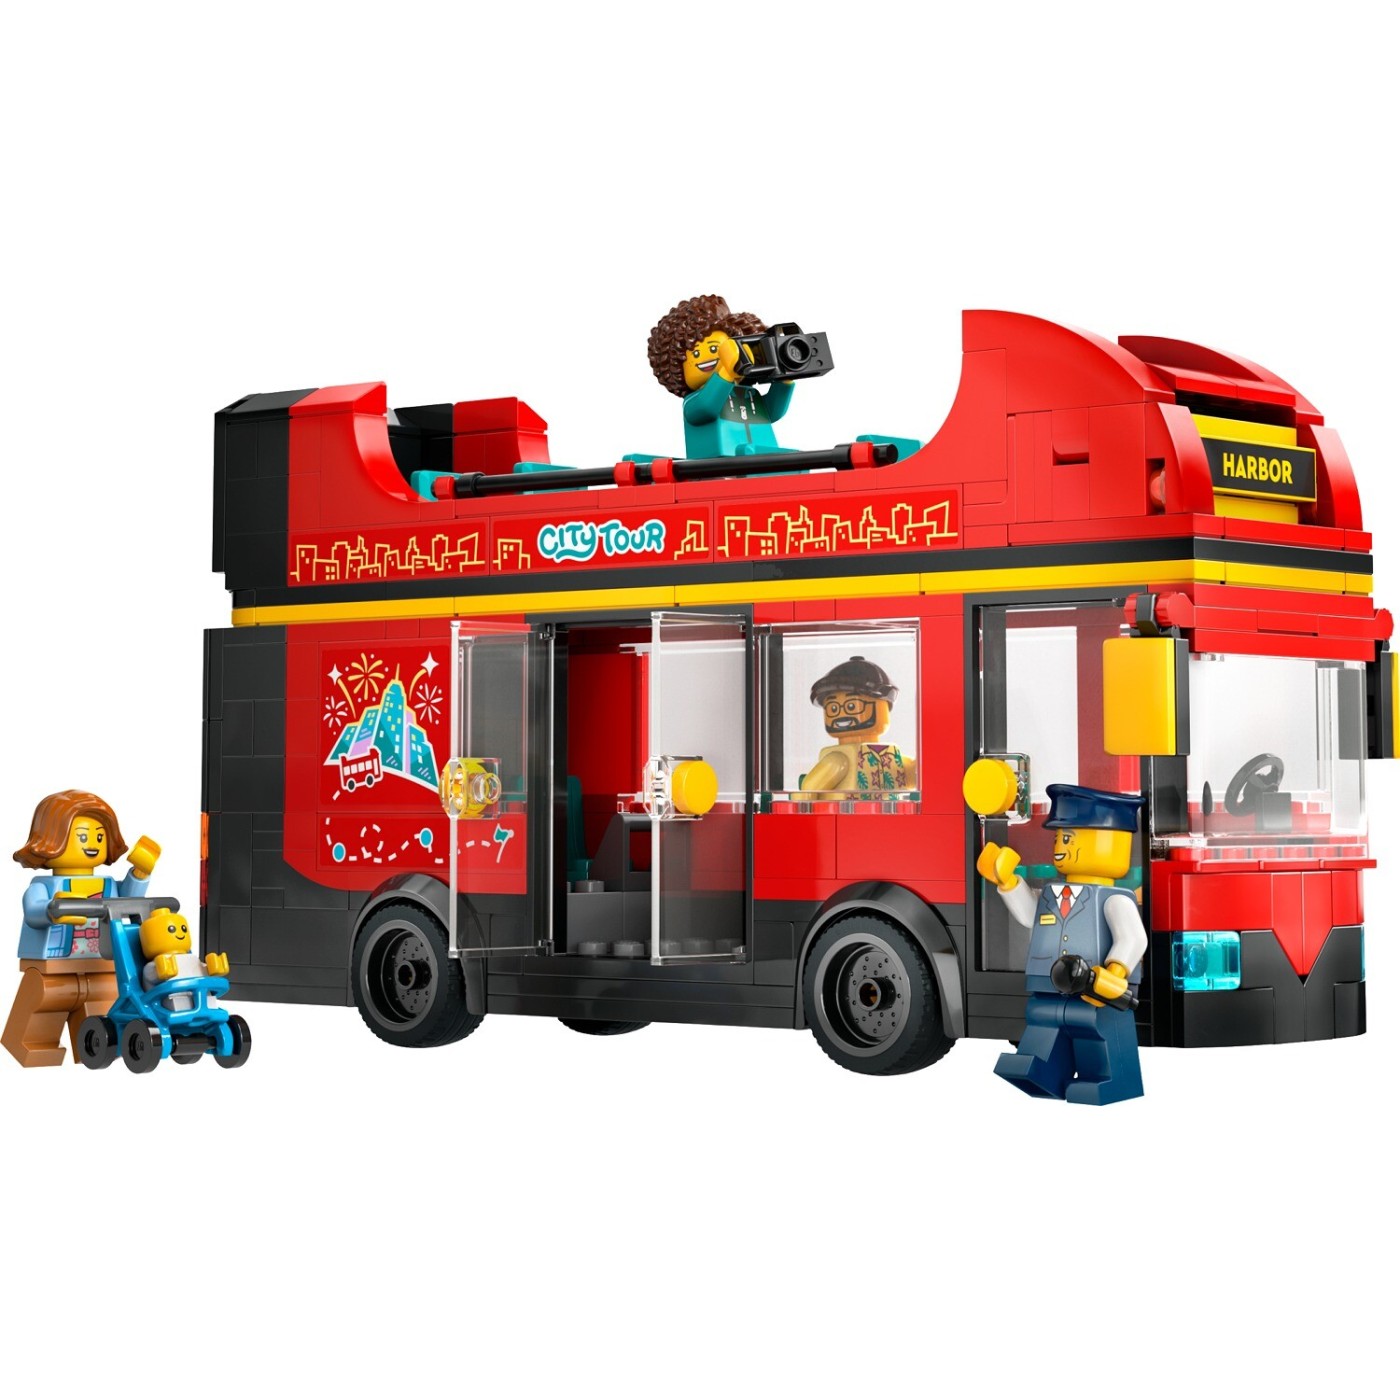 Lego City Red Double Decker Sightseeing Bus (60407)